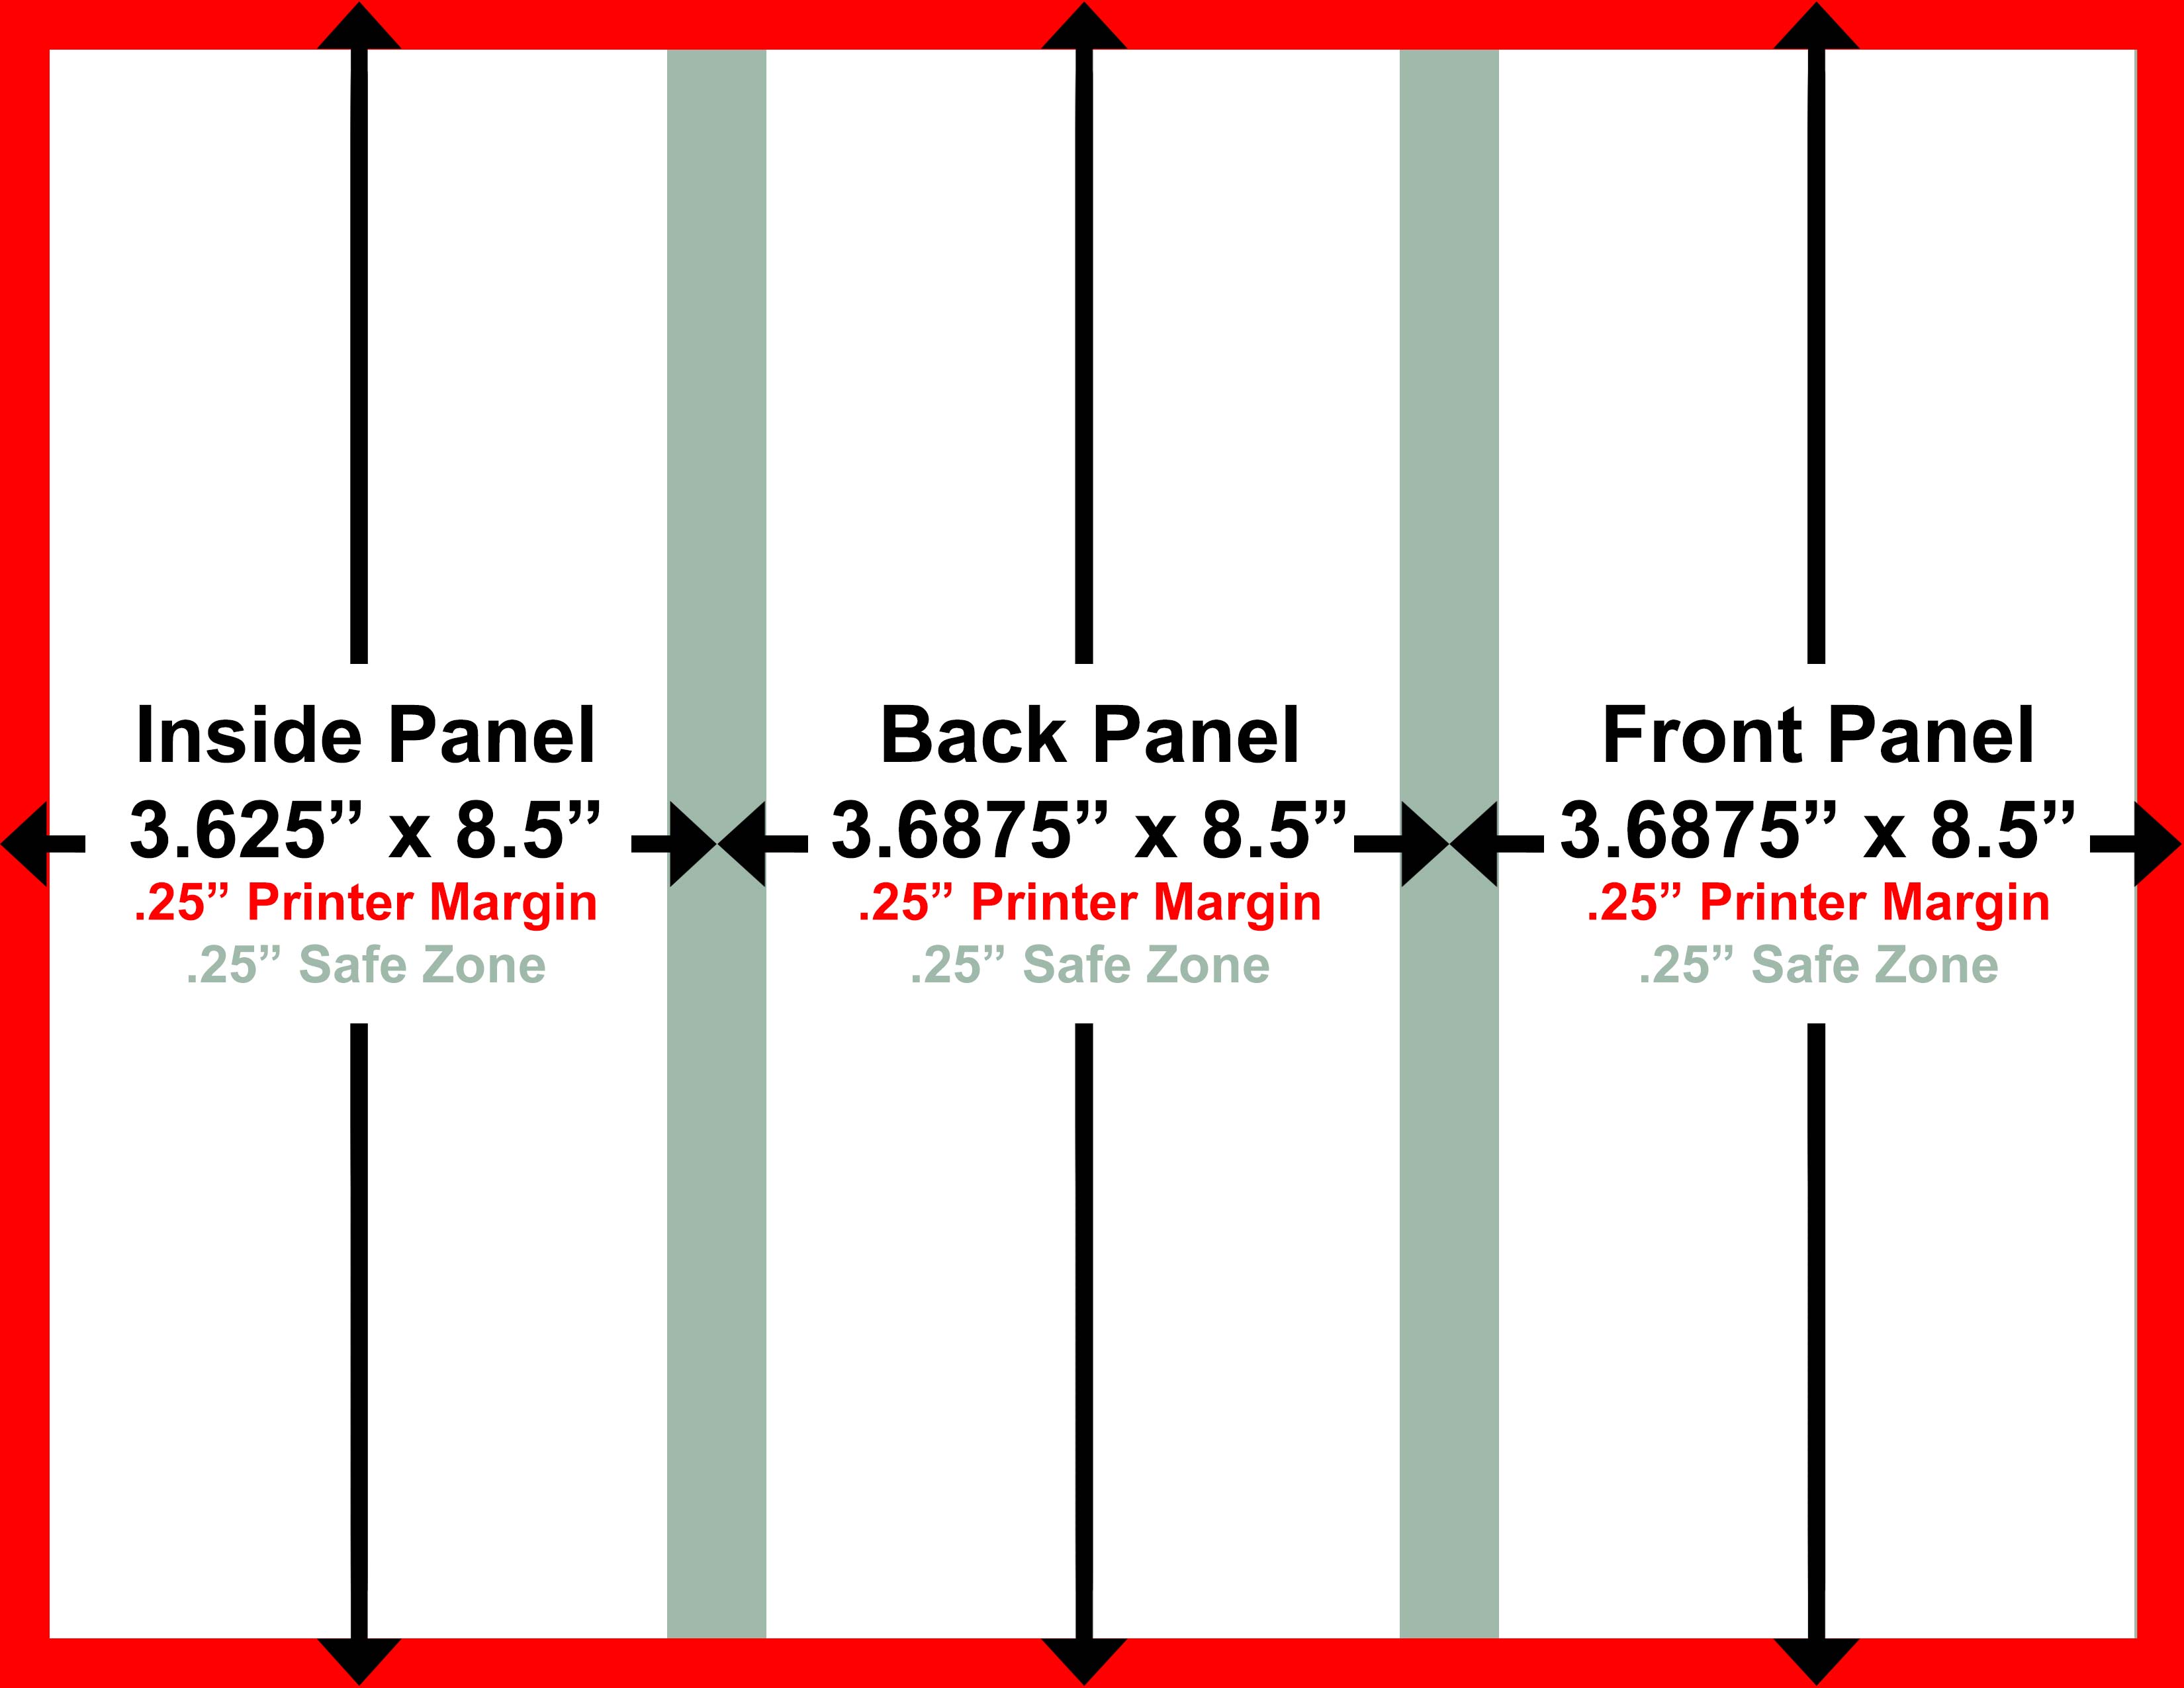 Outside panel dimensions for tri-fold brochure, non-bleed